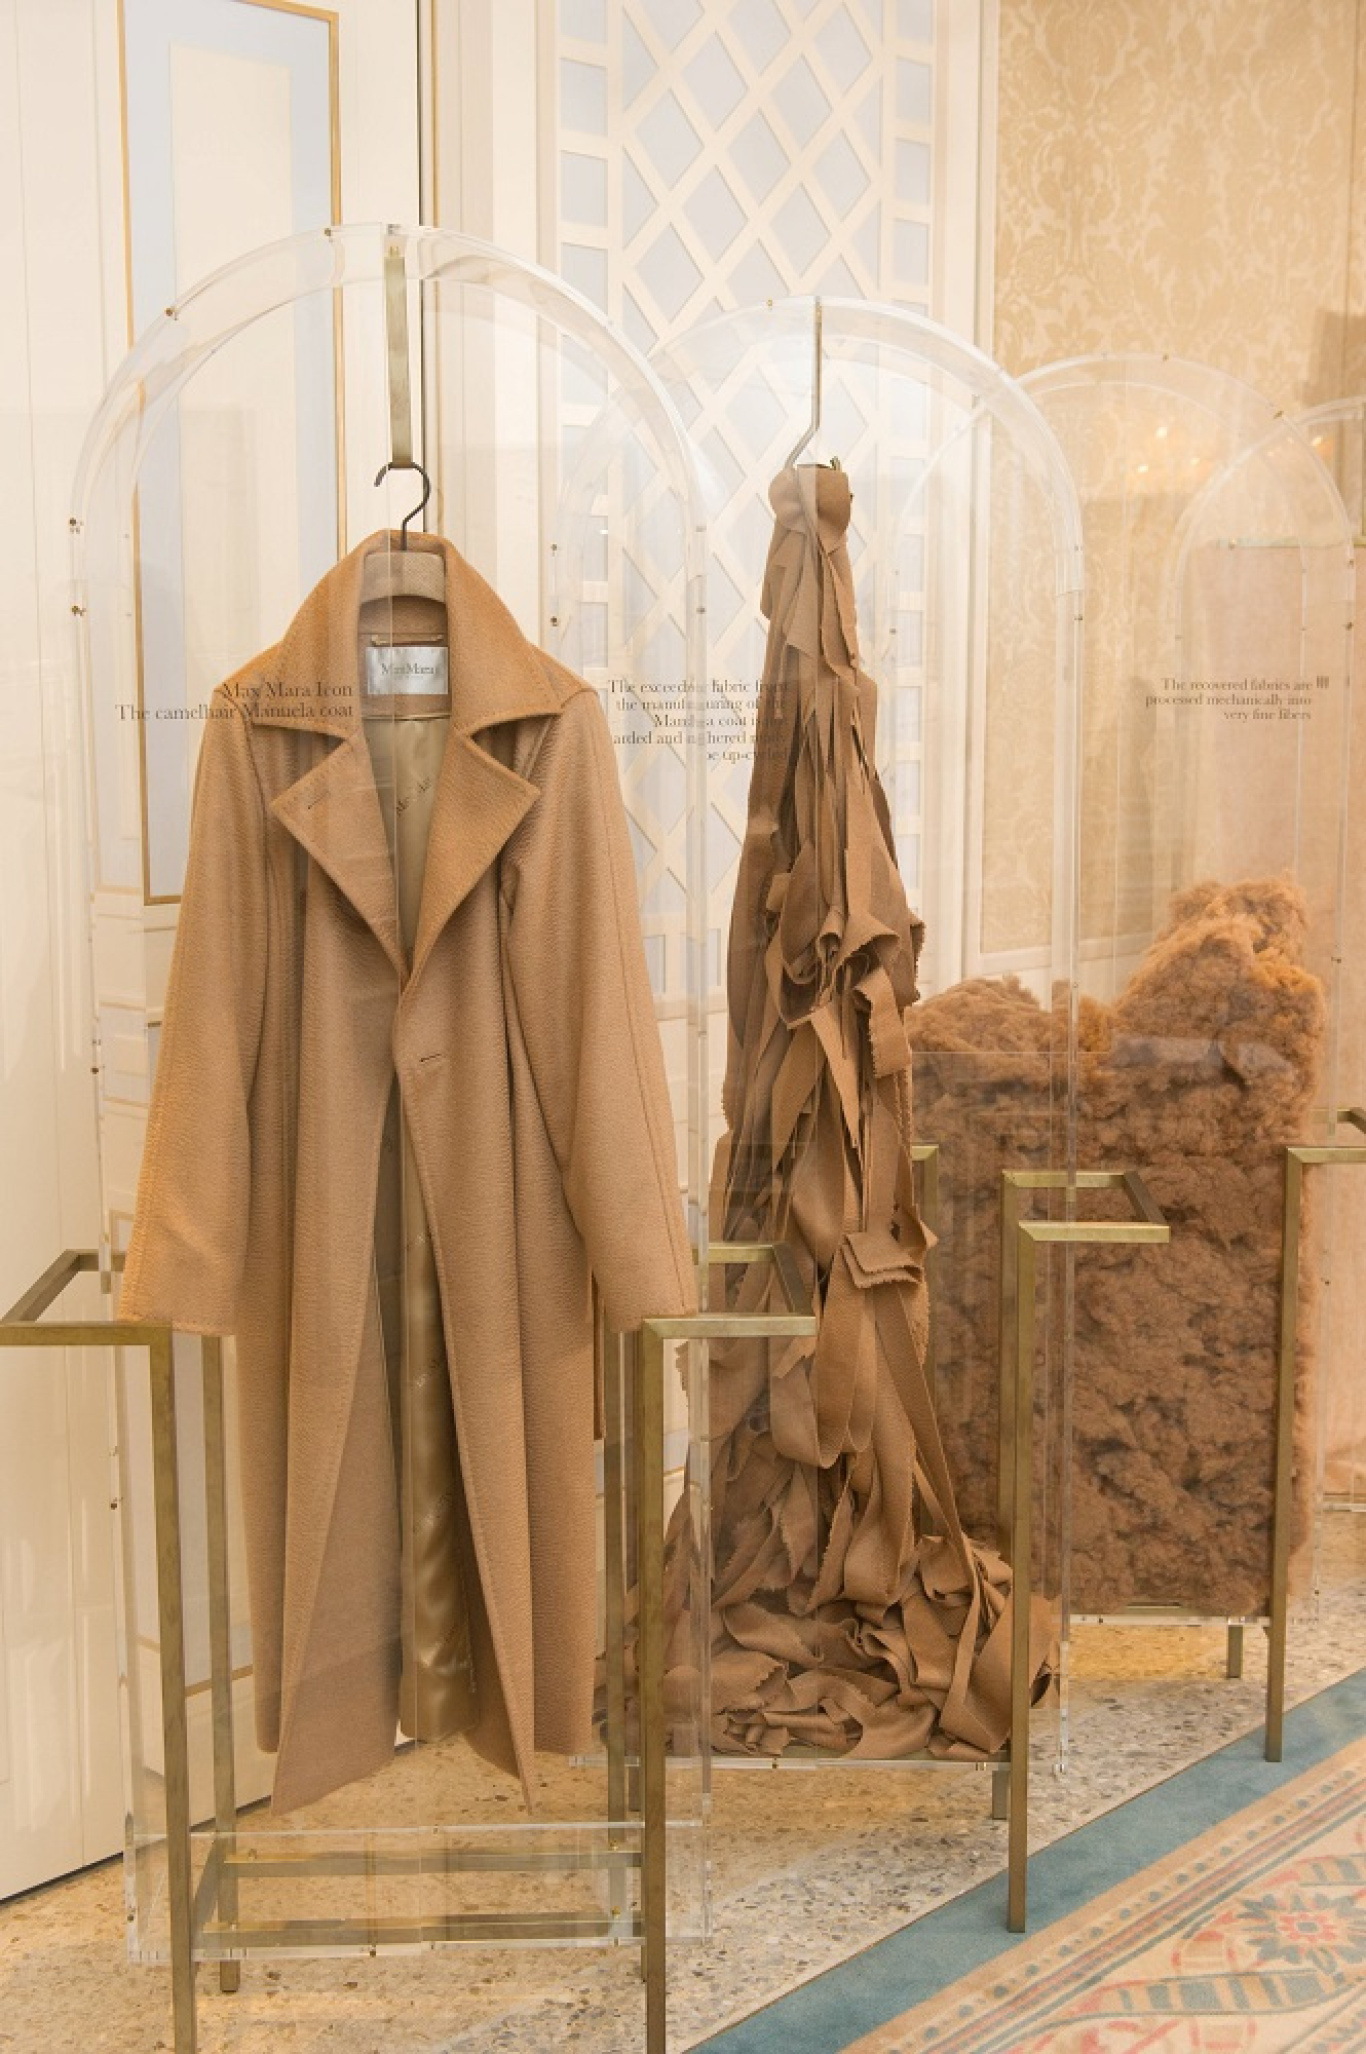 Max Mara inroduces CameLux at the occasion of the Roundtable on